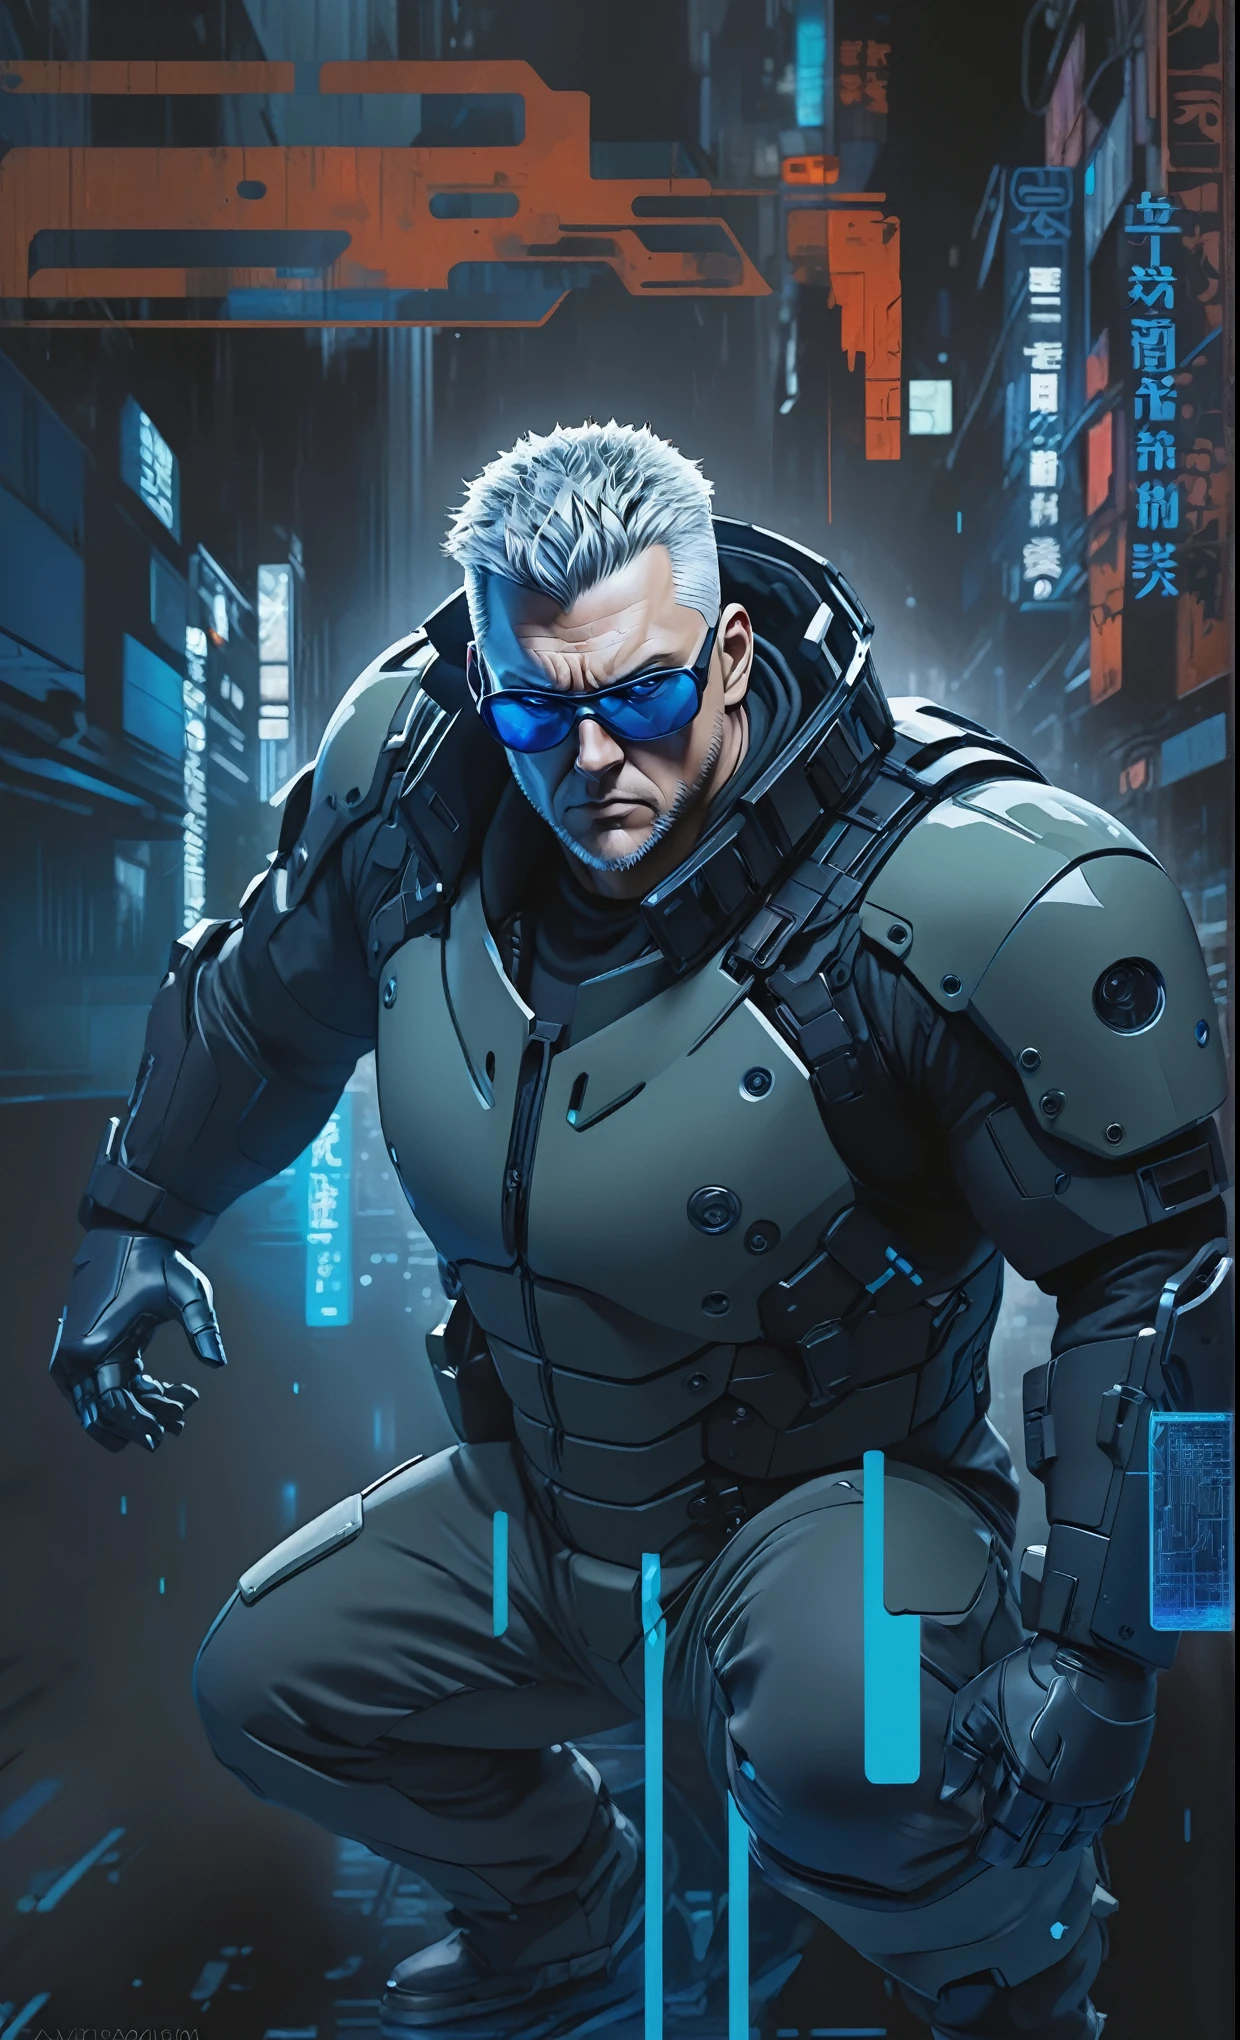 Ghost in the Shell Vol.2 - Batou, by Luis Duarte, Luis Duarte style, blue and black shading, Neo-Tokyo style, Element Air, Mythpunk, Graphic Interface, Sci-Fic Art, Dark Influence, NijiExpress 3D v3, Kinetic Art, Datanoshing, Oilpainting, Ink v3, Splash style, Abstract Art, Abstract Tech, Cyber Tech Elements, Futuristic, Illustrated v3, Deco Influence, AirBrush style, drawing